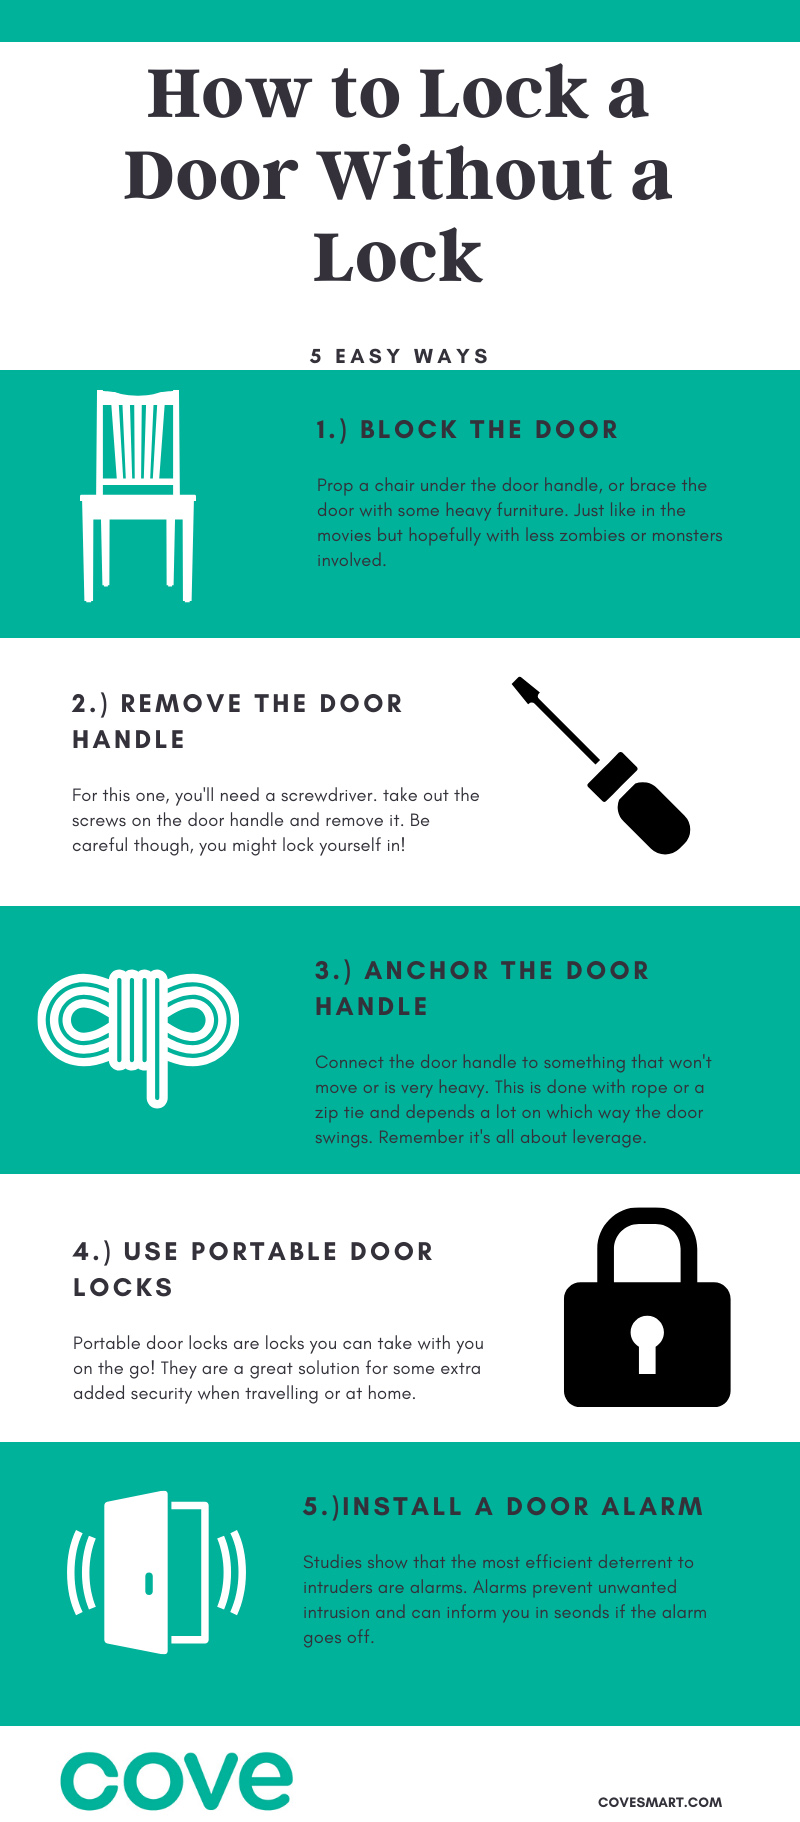 Infographic: 5 ways to lock a door without a lock.